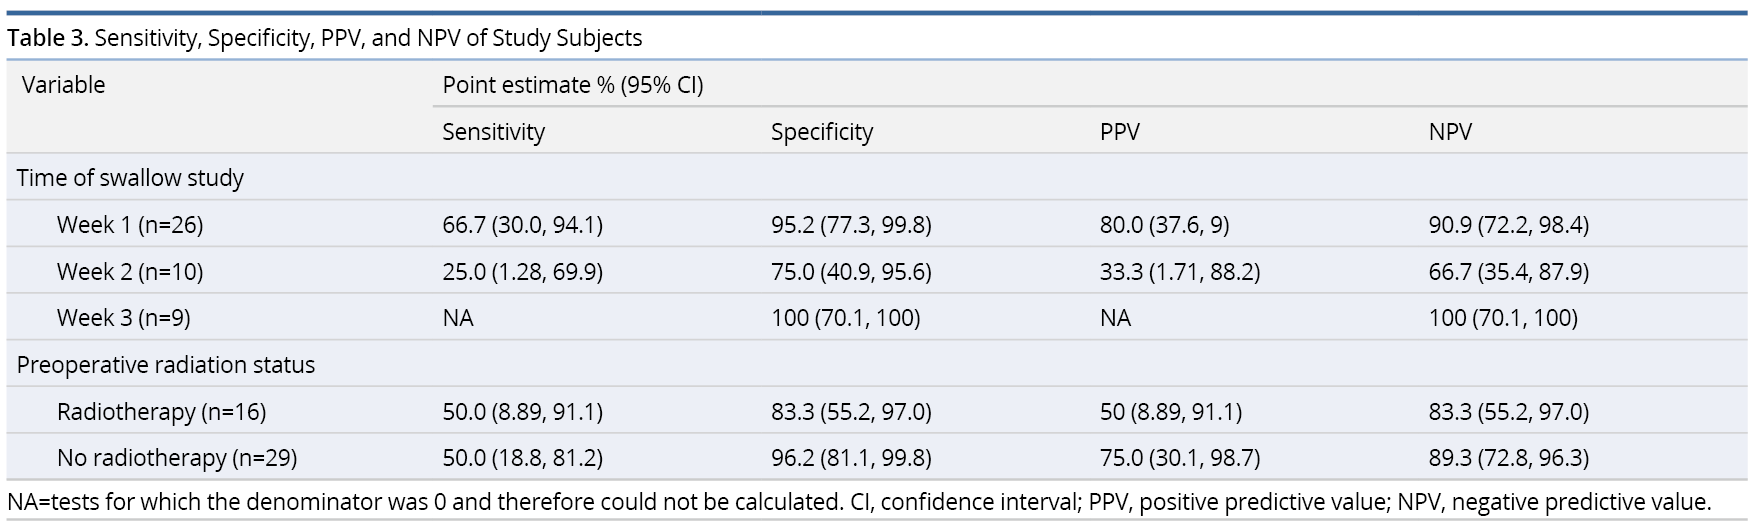 Table 3.pngSensitivity, Specificity, PPV, and NPV of Study Subjects